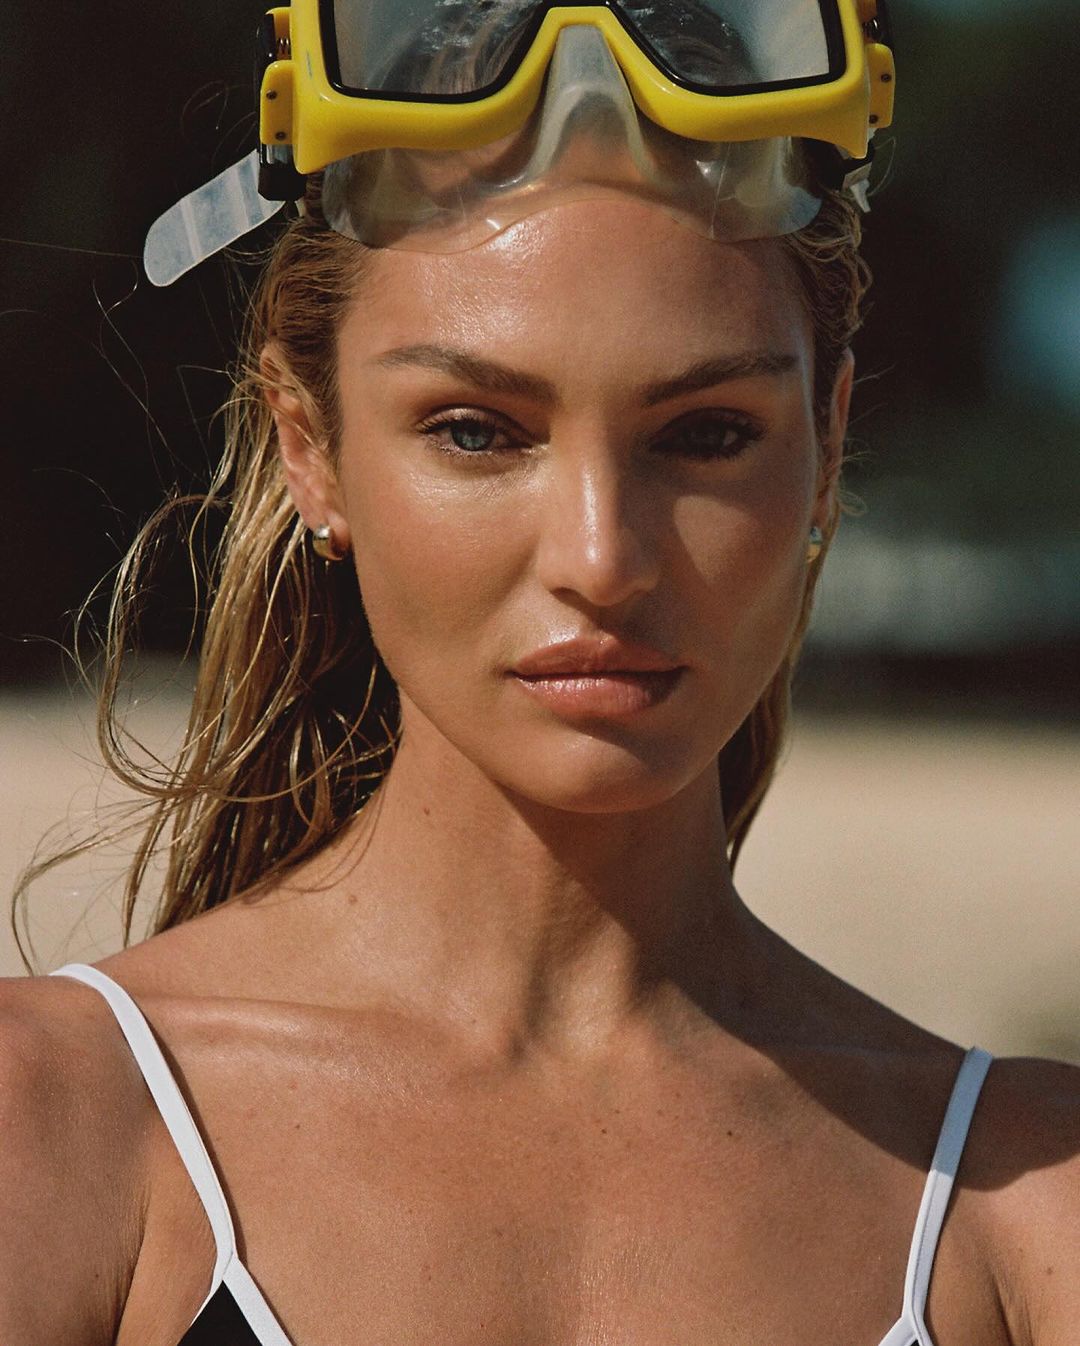 Photos n°4 : Candice Swanepoel and Hailey Bieber Link Up on the Beach!